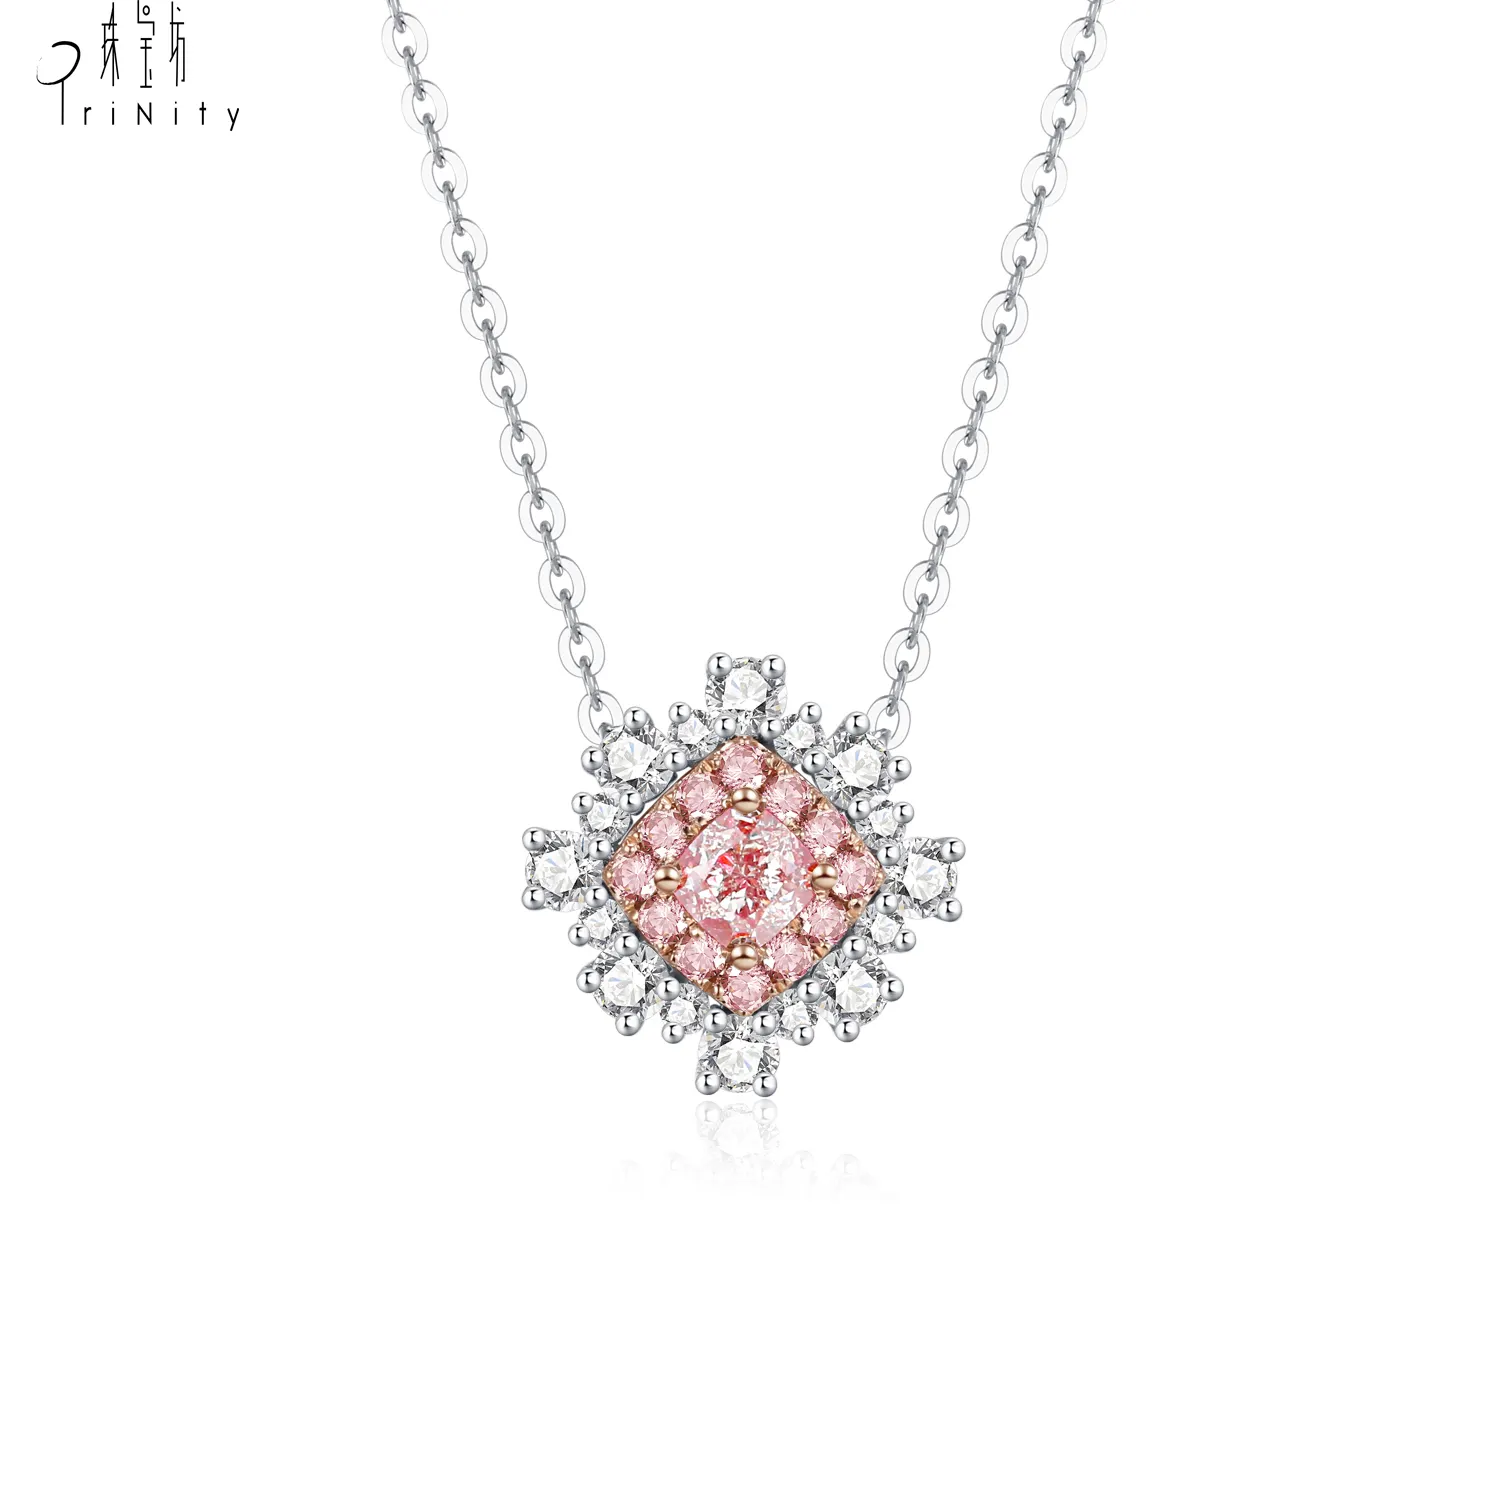 New Design Necklace Luxury Elegant Jewelry 18K White Gold Natural Fancy Pink Diamond Pendant Necklace For Female